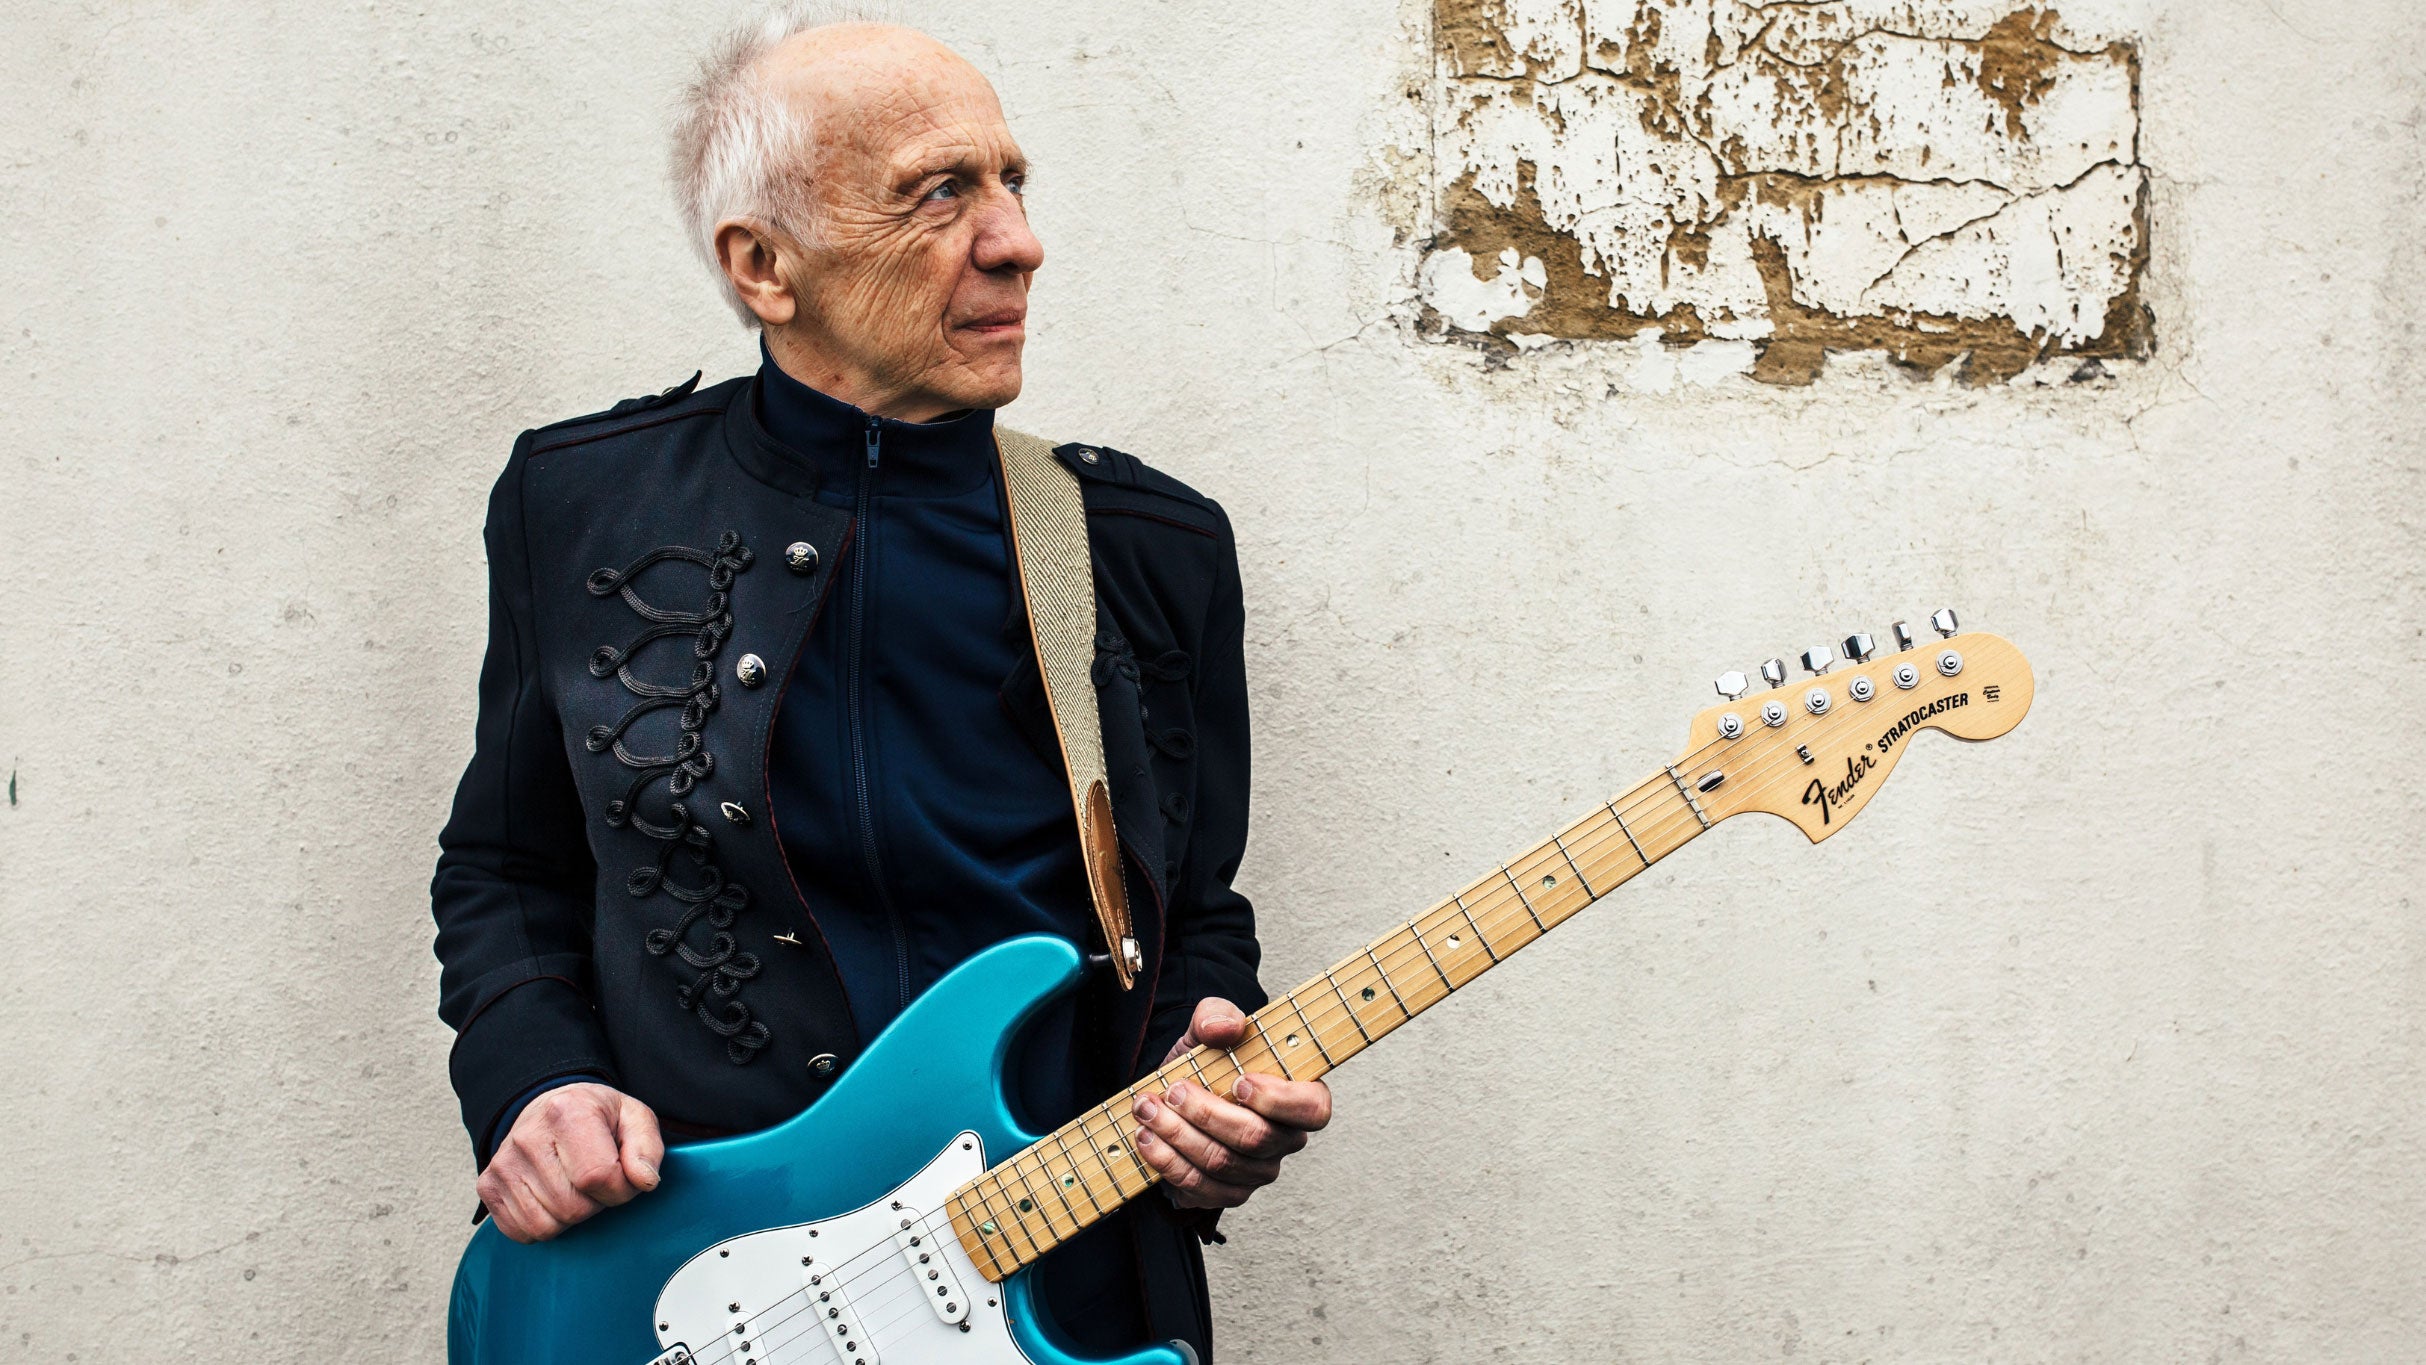 updated presale password for Robin Trower face value tickets in Salisbury